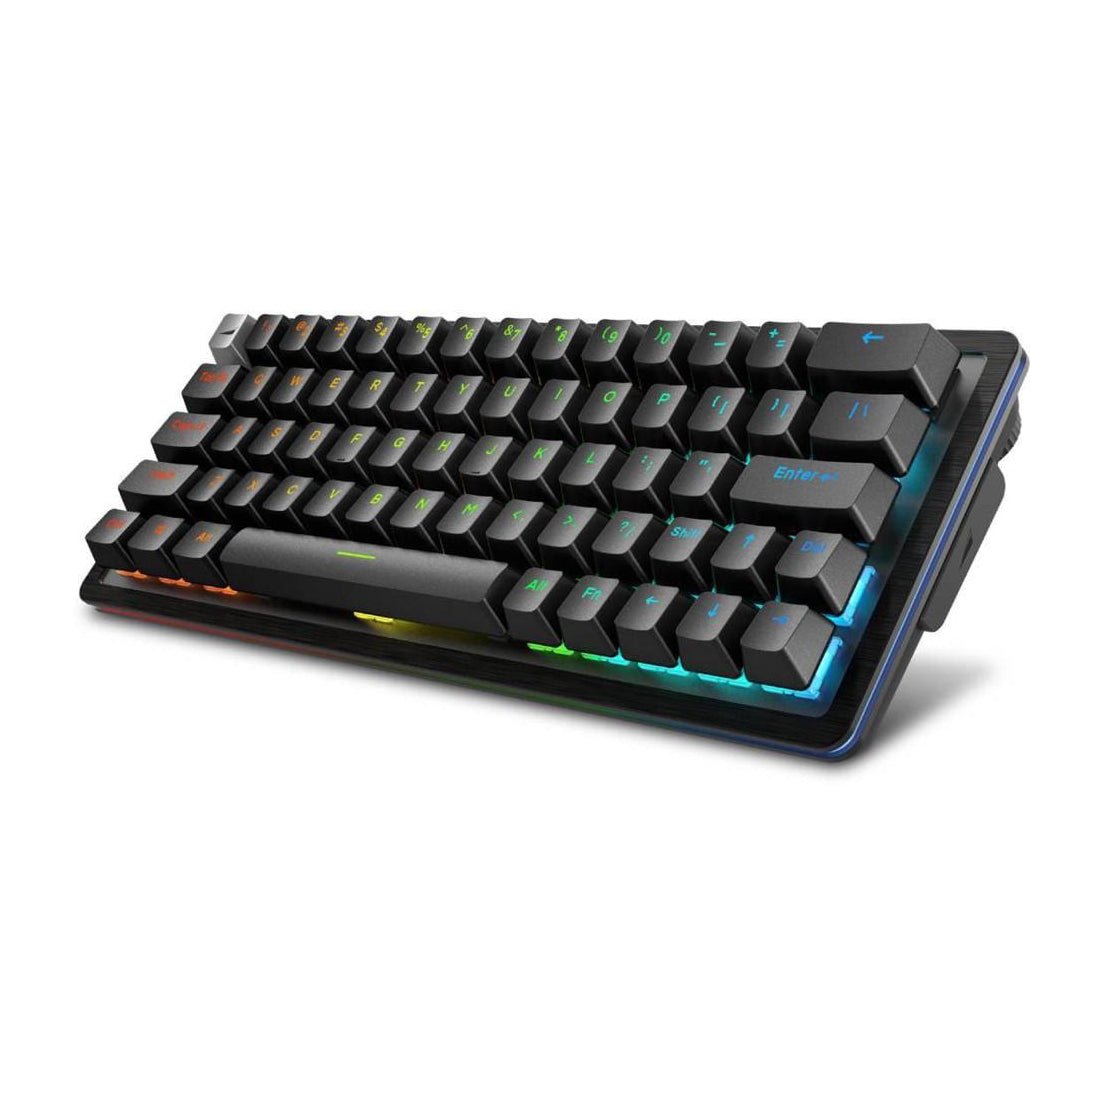 Mountain Everest 60 Tactile 55 Switch Mechanical Gaming Keyboard - Black - Store 974 | ستور ٩٧٤